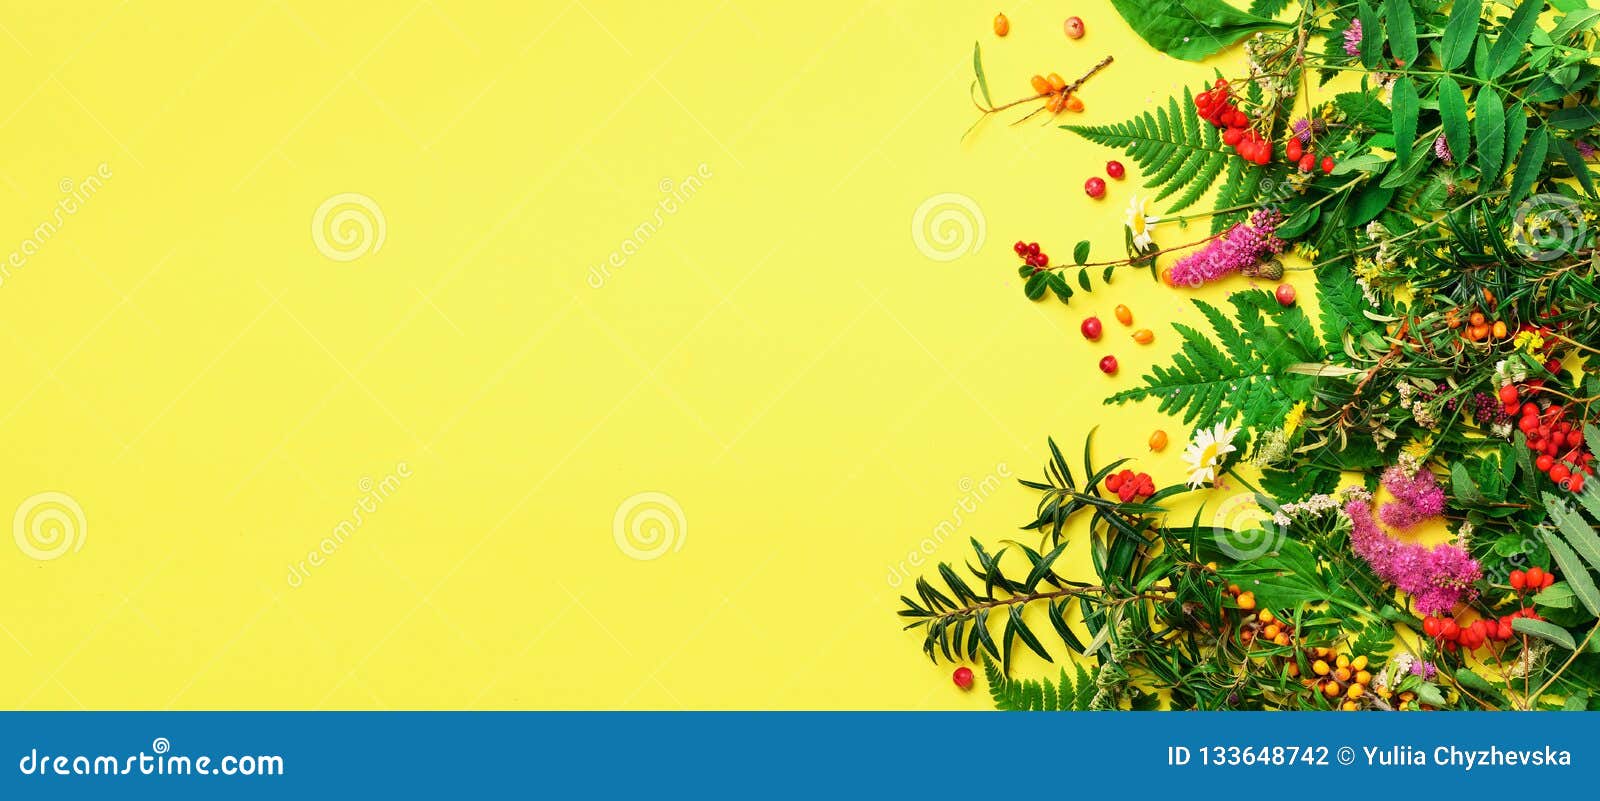 ingredients of herbal alternative medicine, holistic and naturopathy approach on yellow background. herbs, flowers for herbal tea